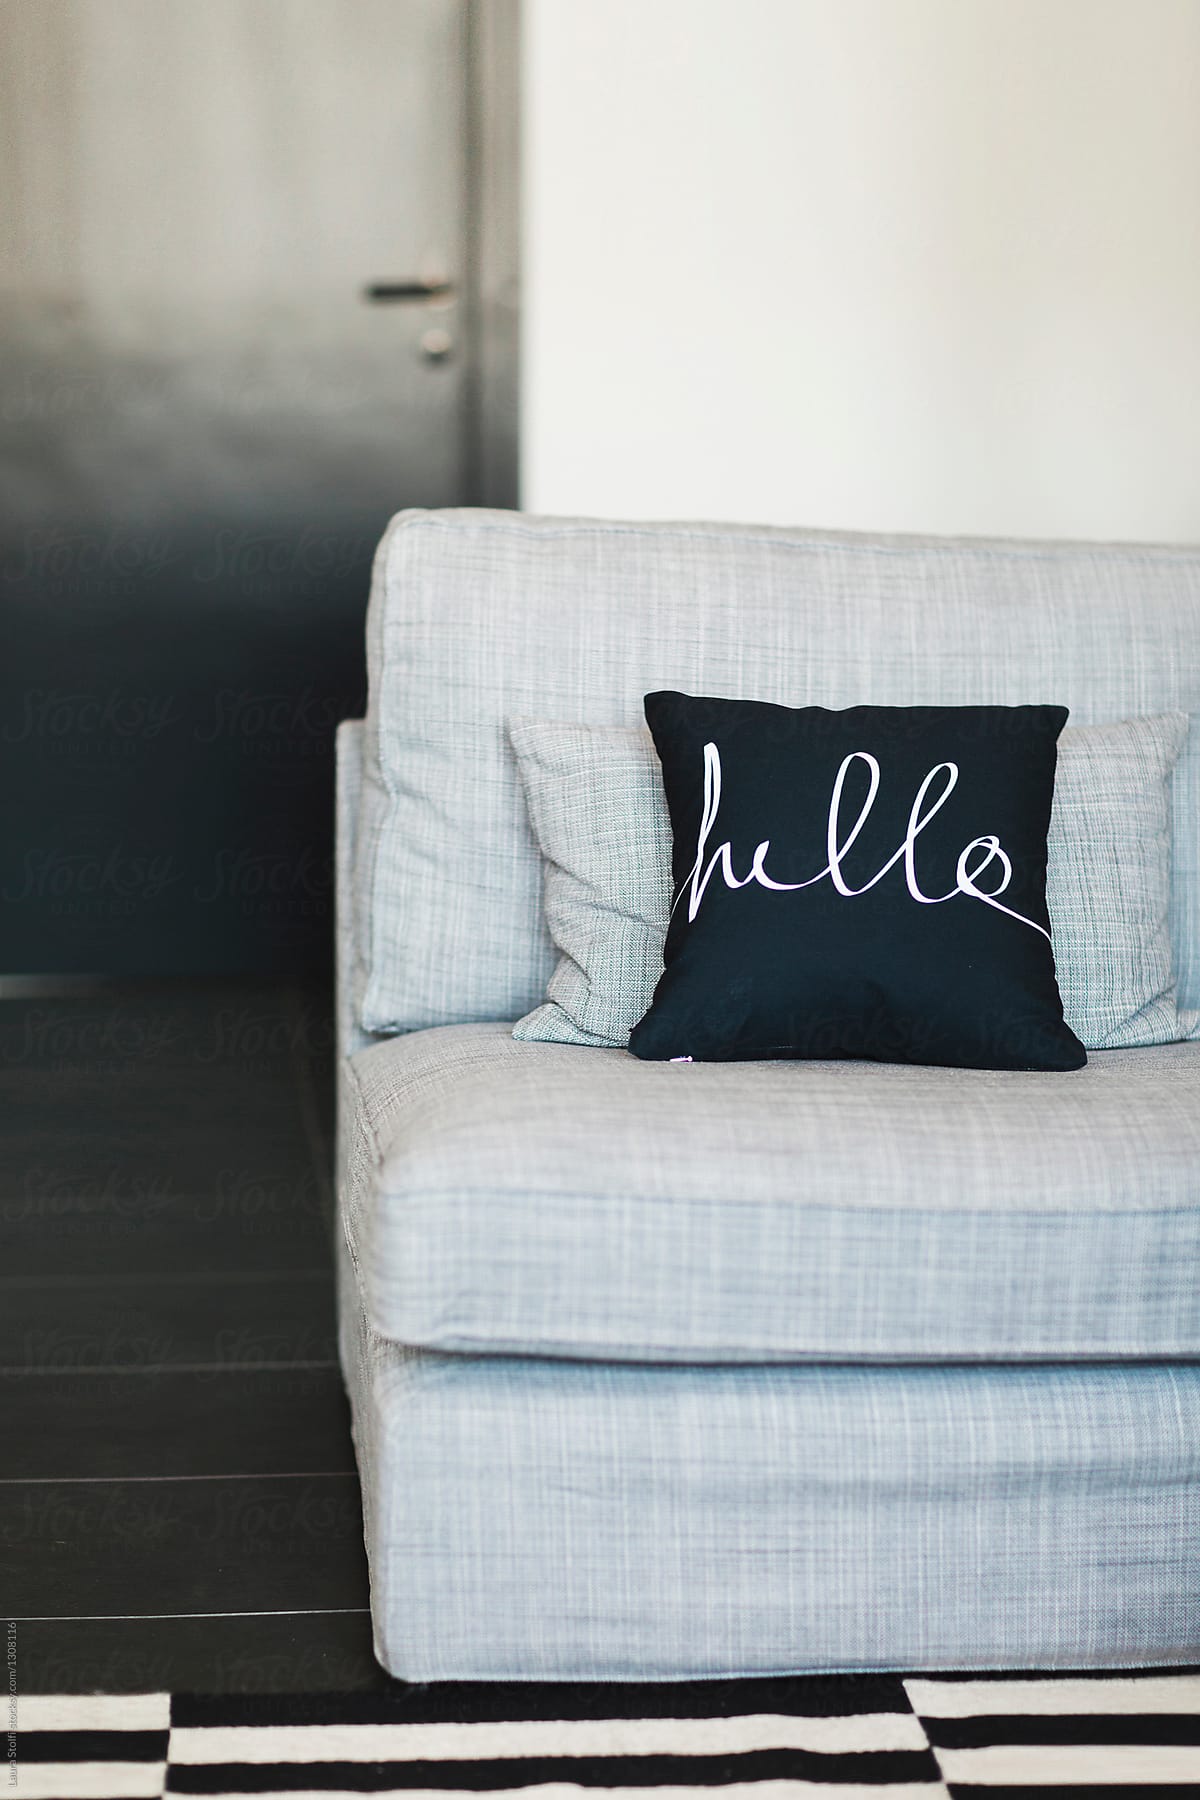 Cushion spelling the word Hello on sofa